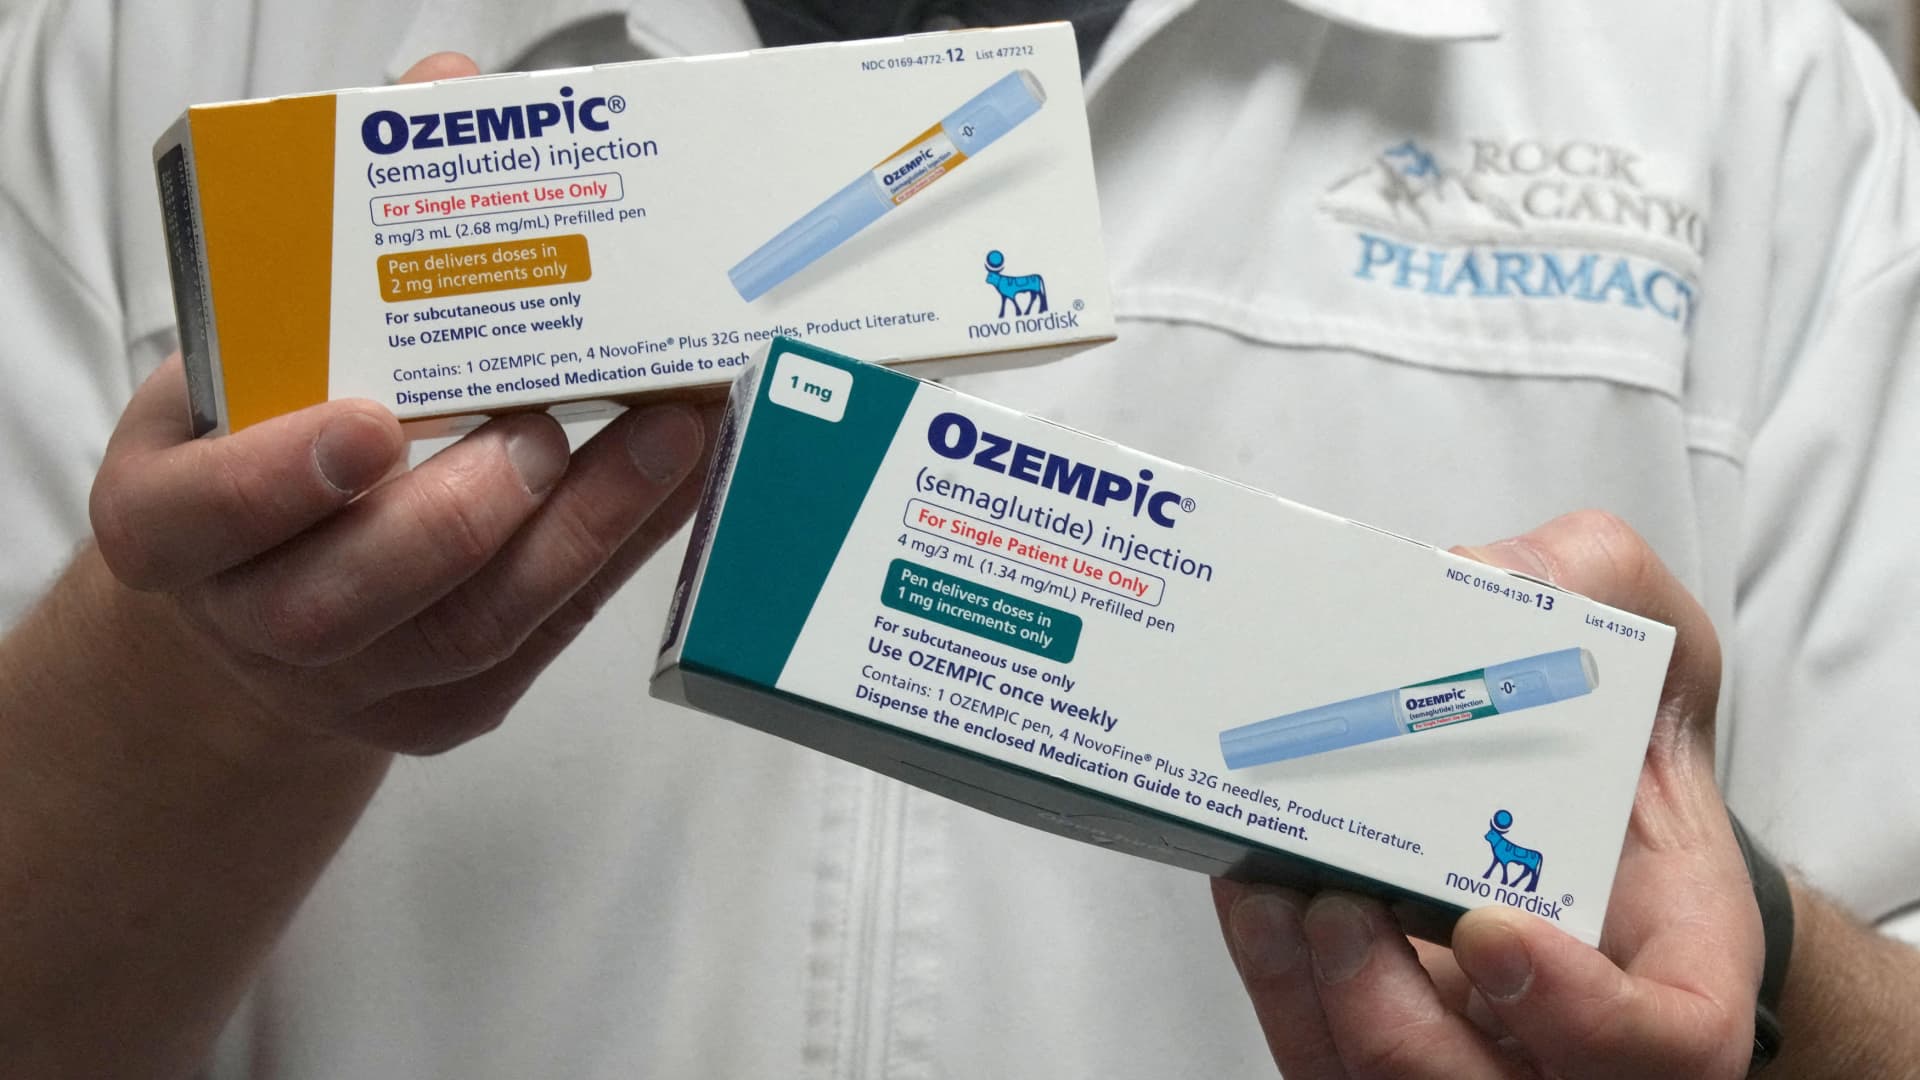 Ozempic could be the next target of Medicare drug price negotiations – here's why